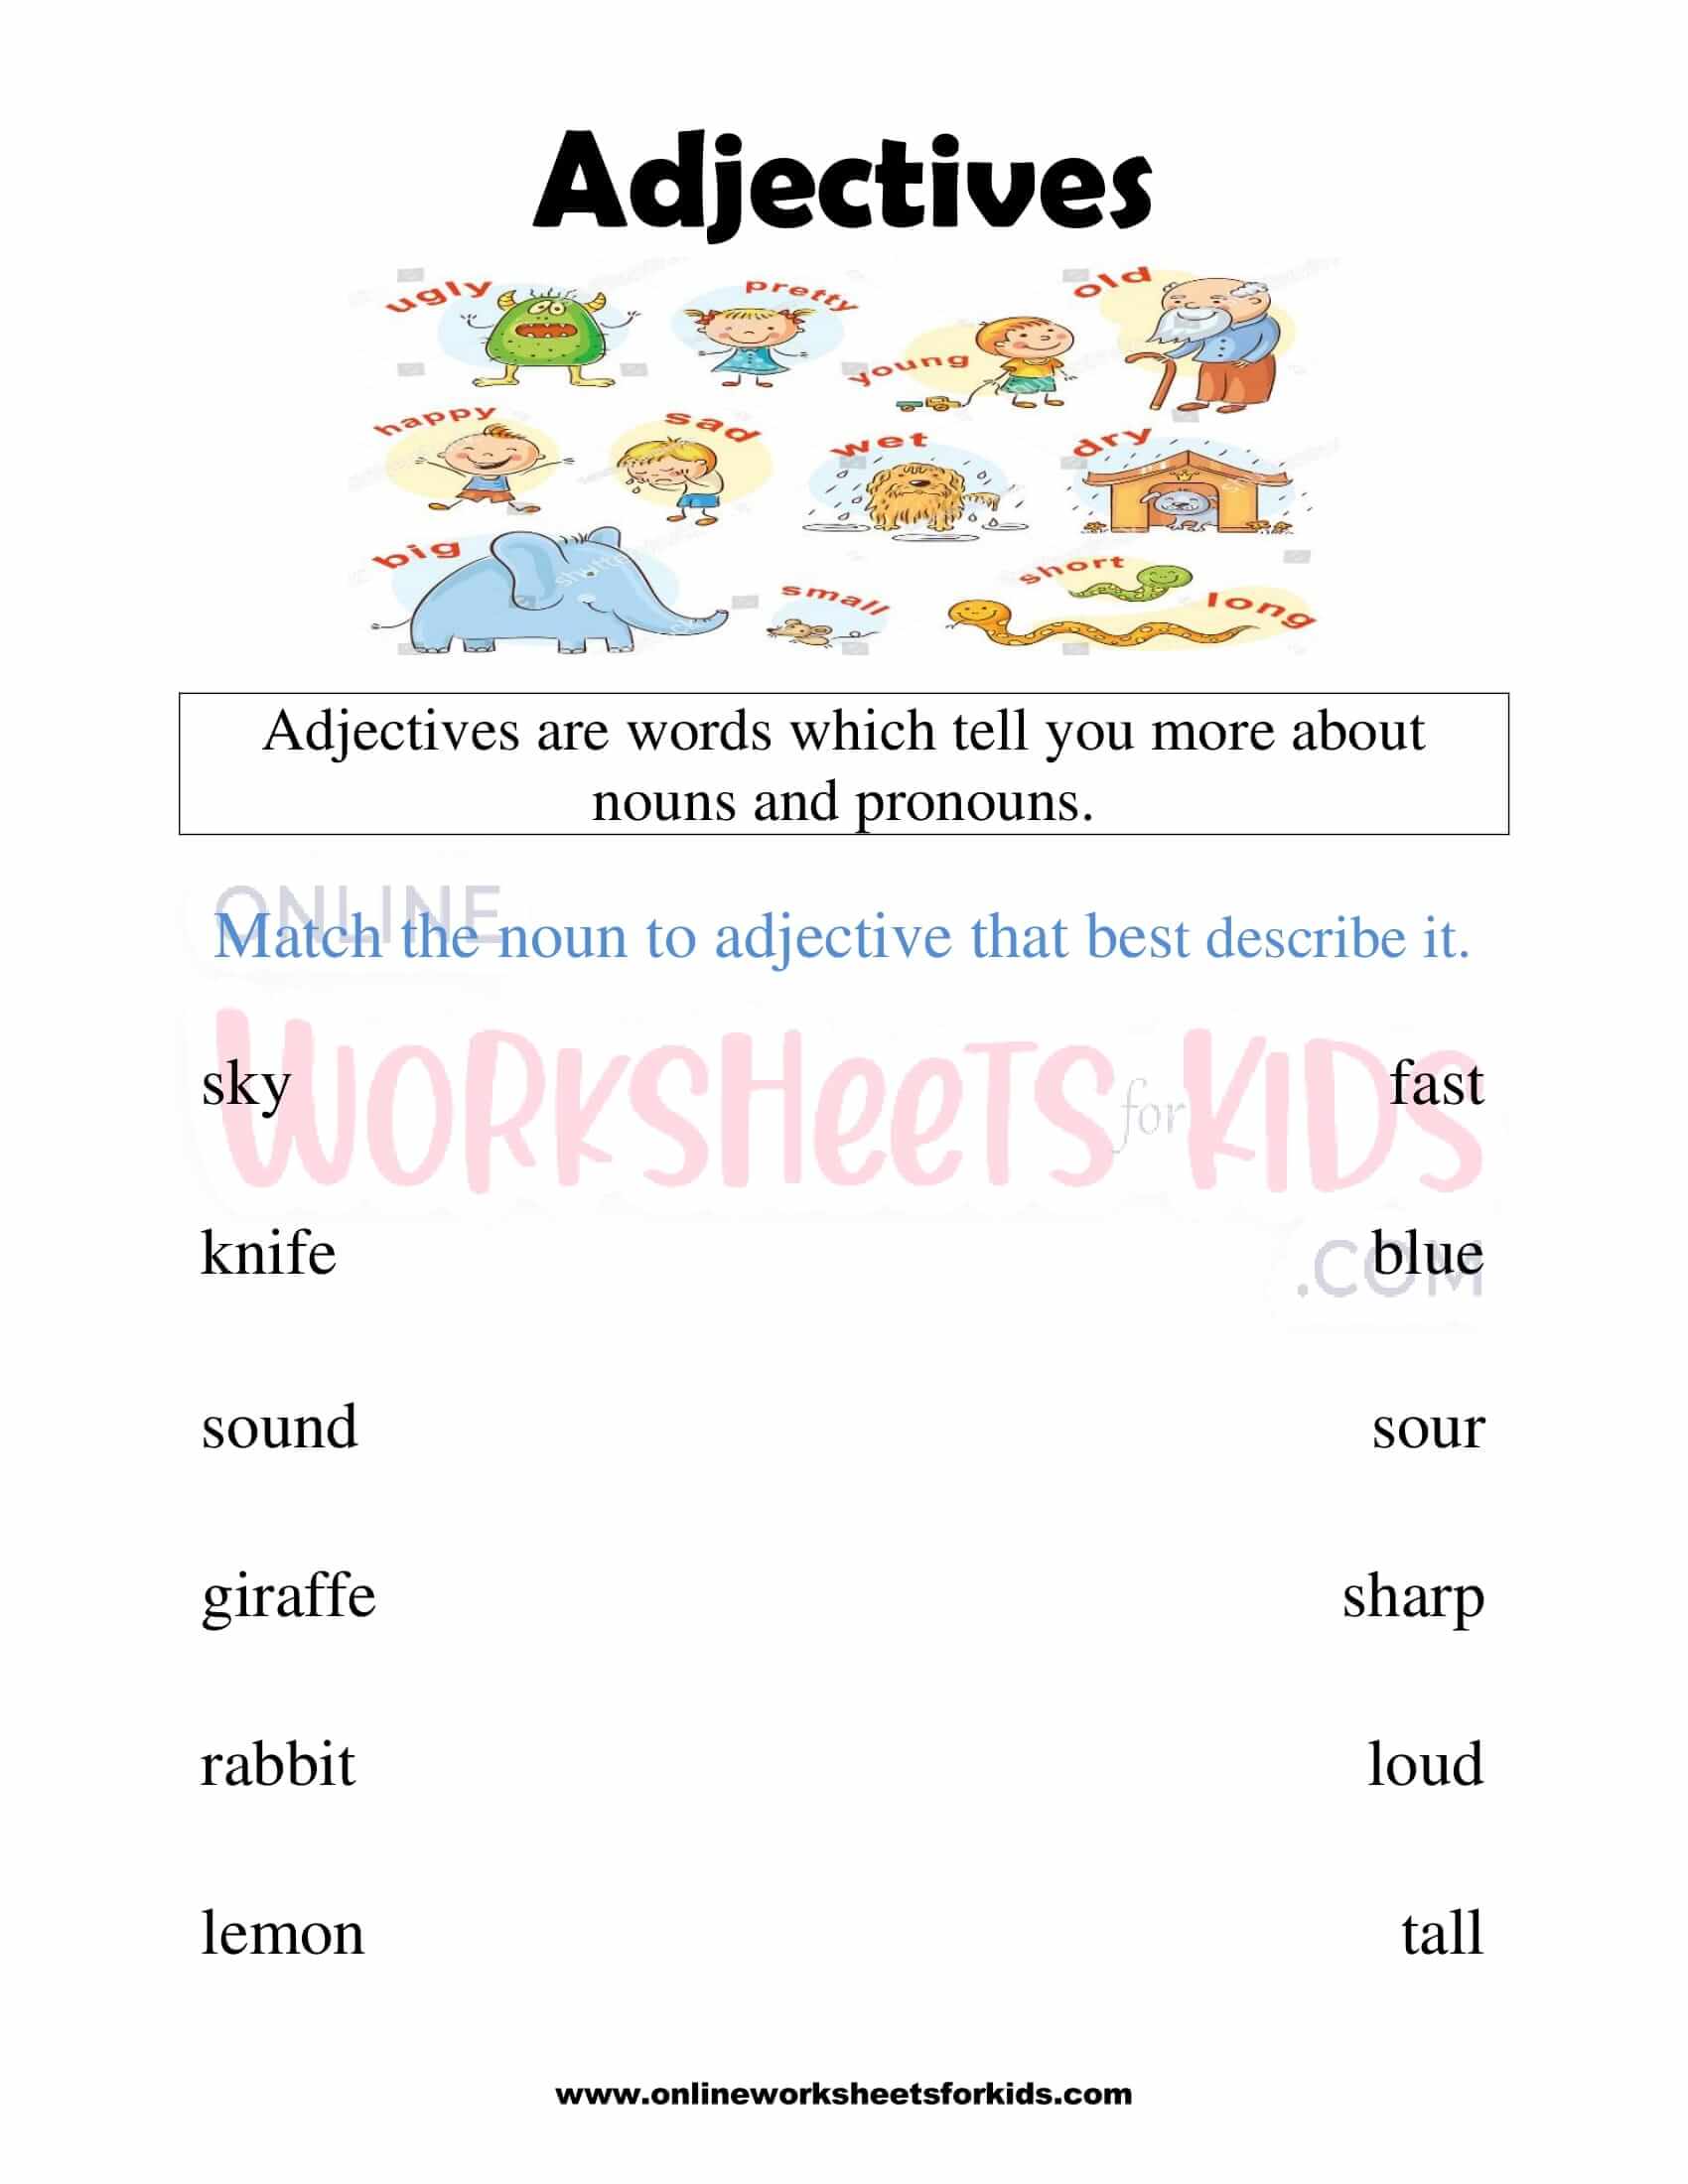 adjectives-worksheets-for-6th-grade